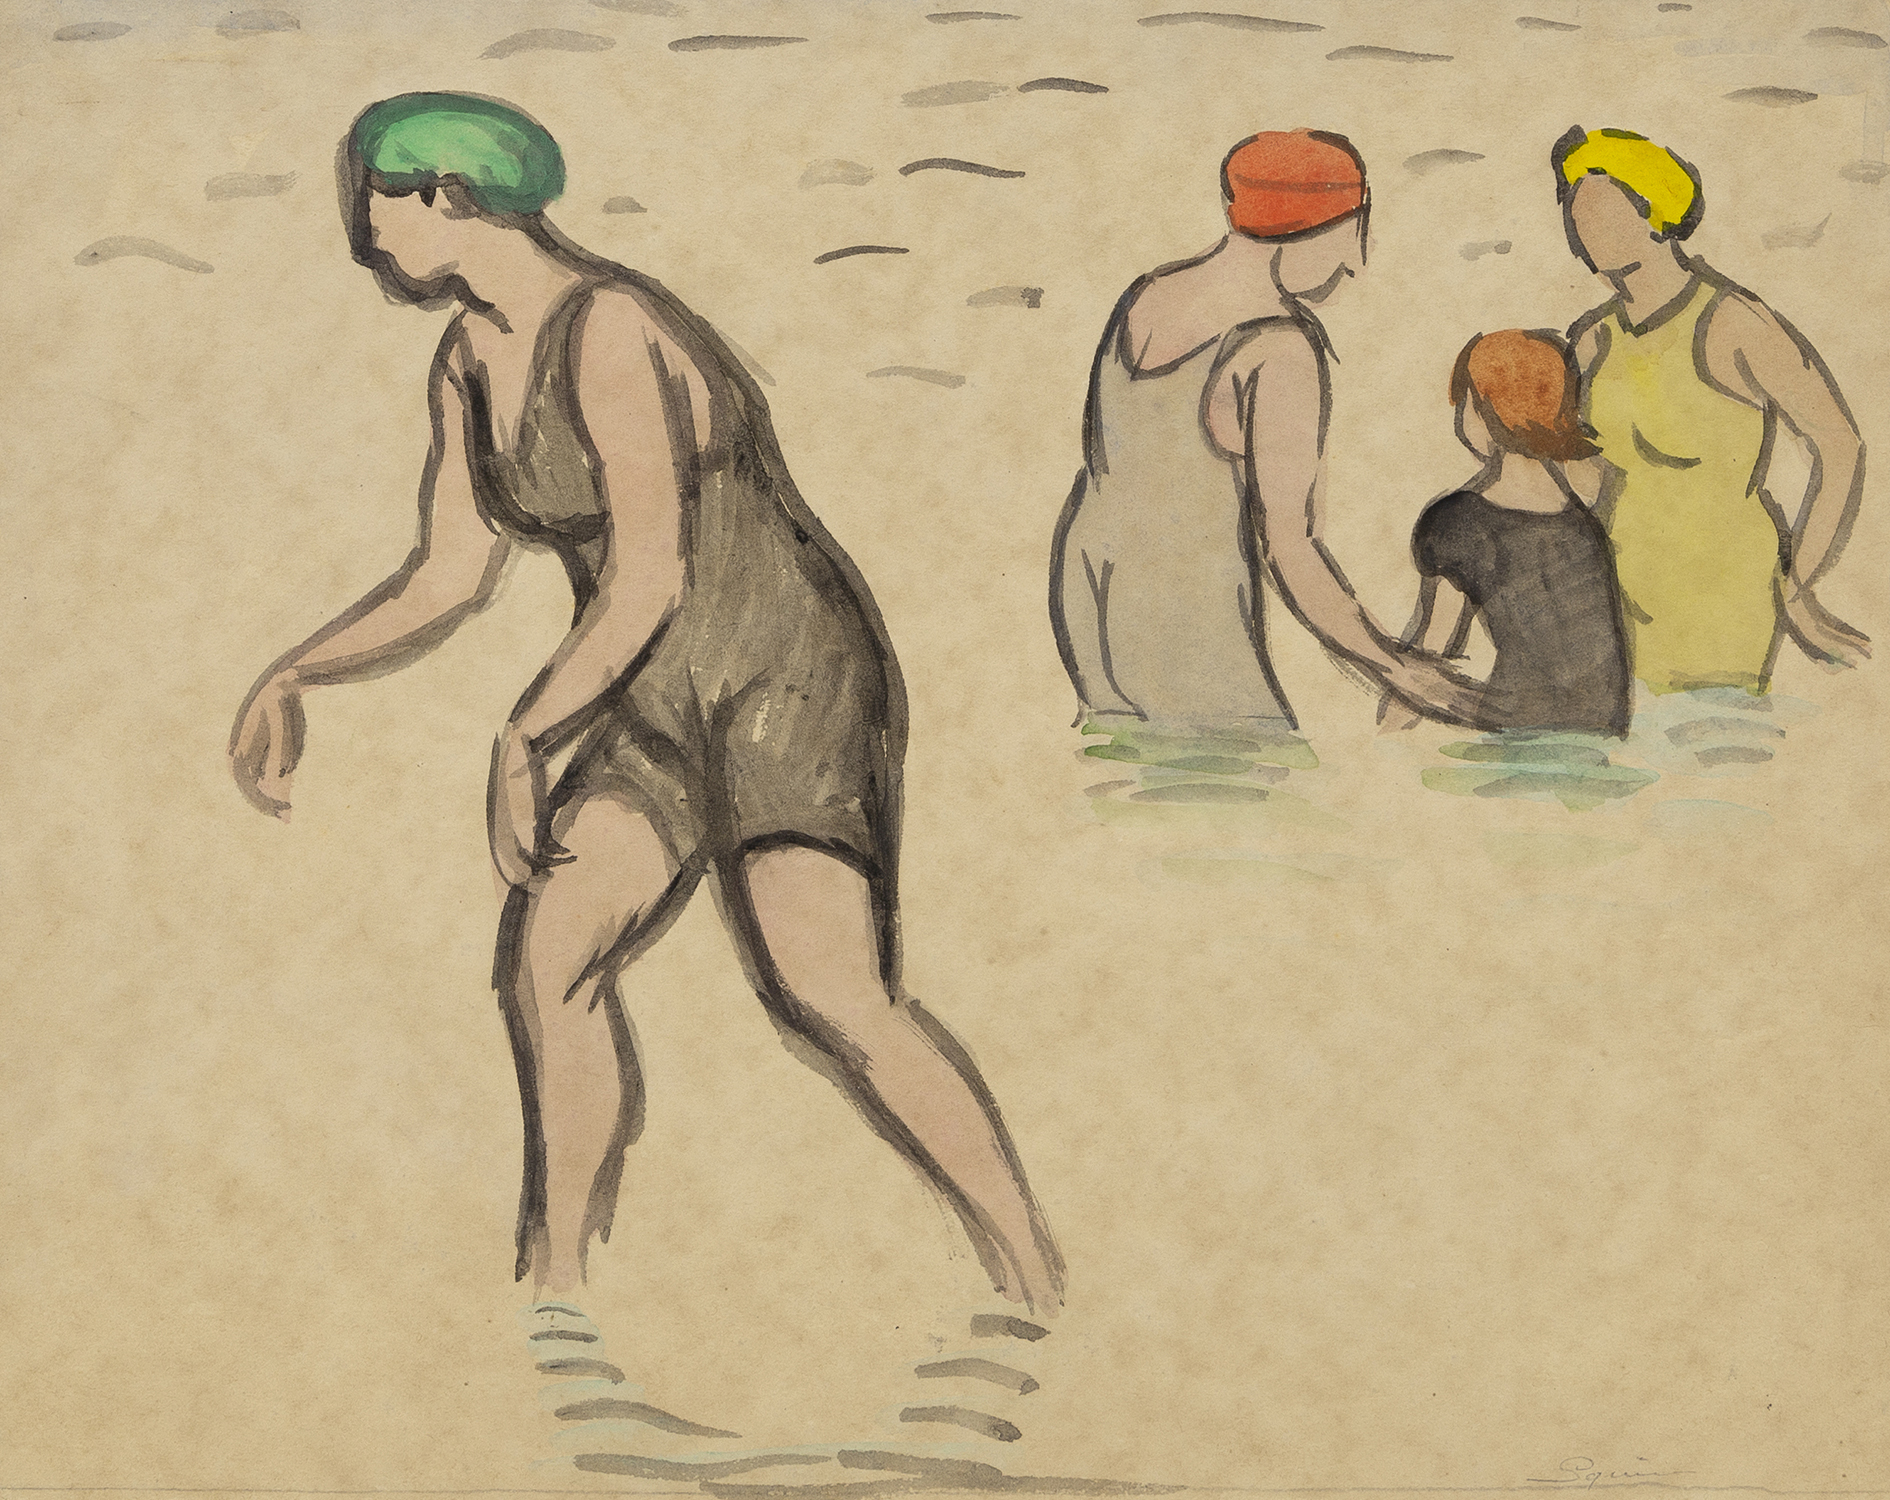 Untitled (Bathers at shore: 3 women and girl with bathing caps), 1917-1919, Watercolor and graphite, 9 x 11 3/8 inches (22.9 x 28.9 cm), Edition size unknown, rare